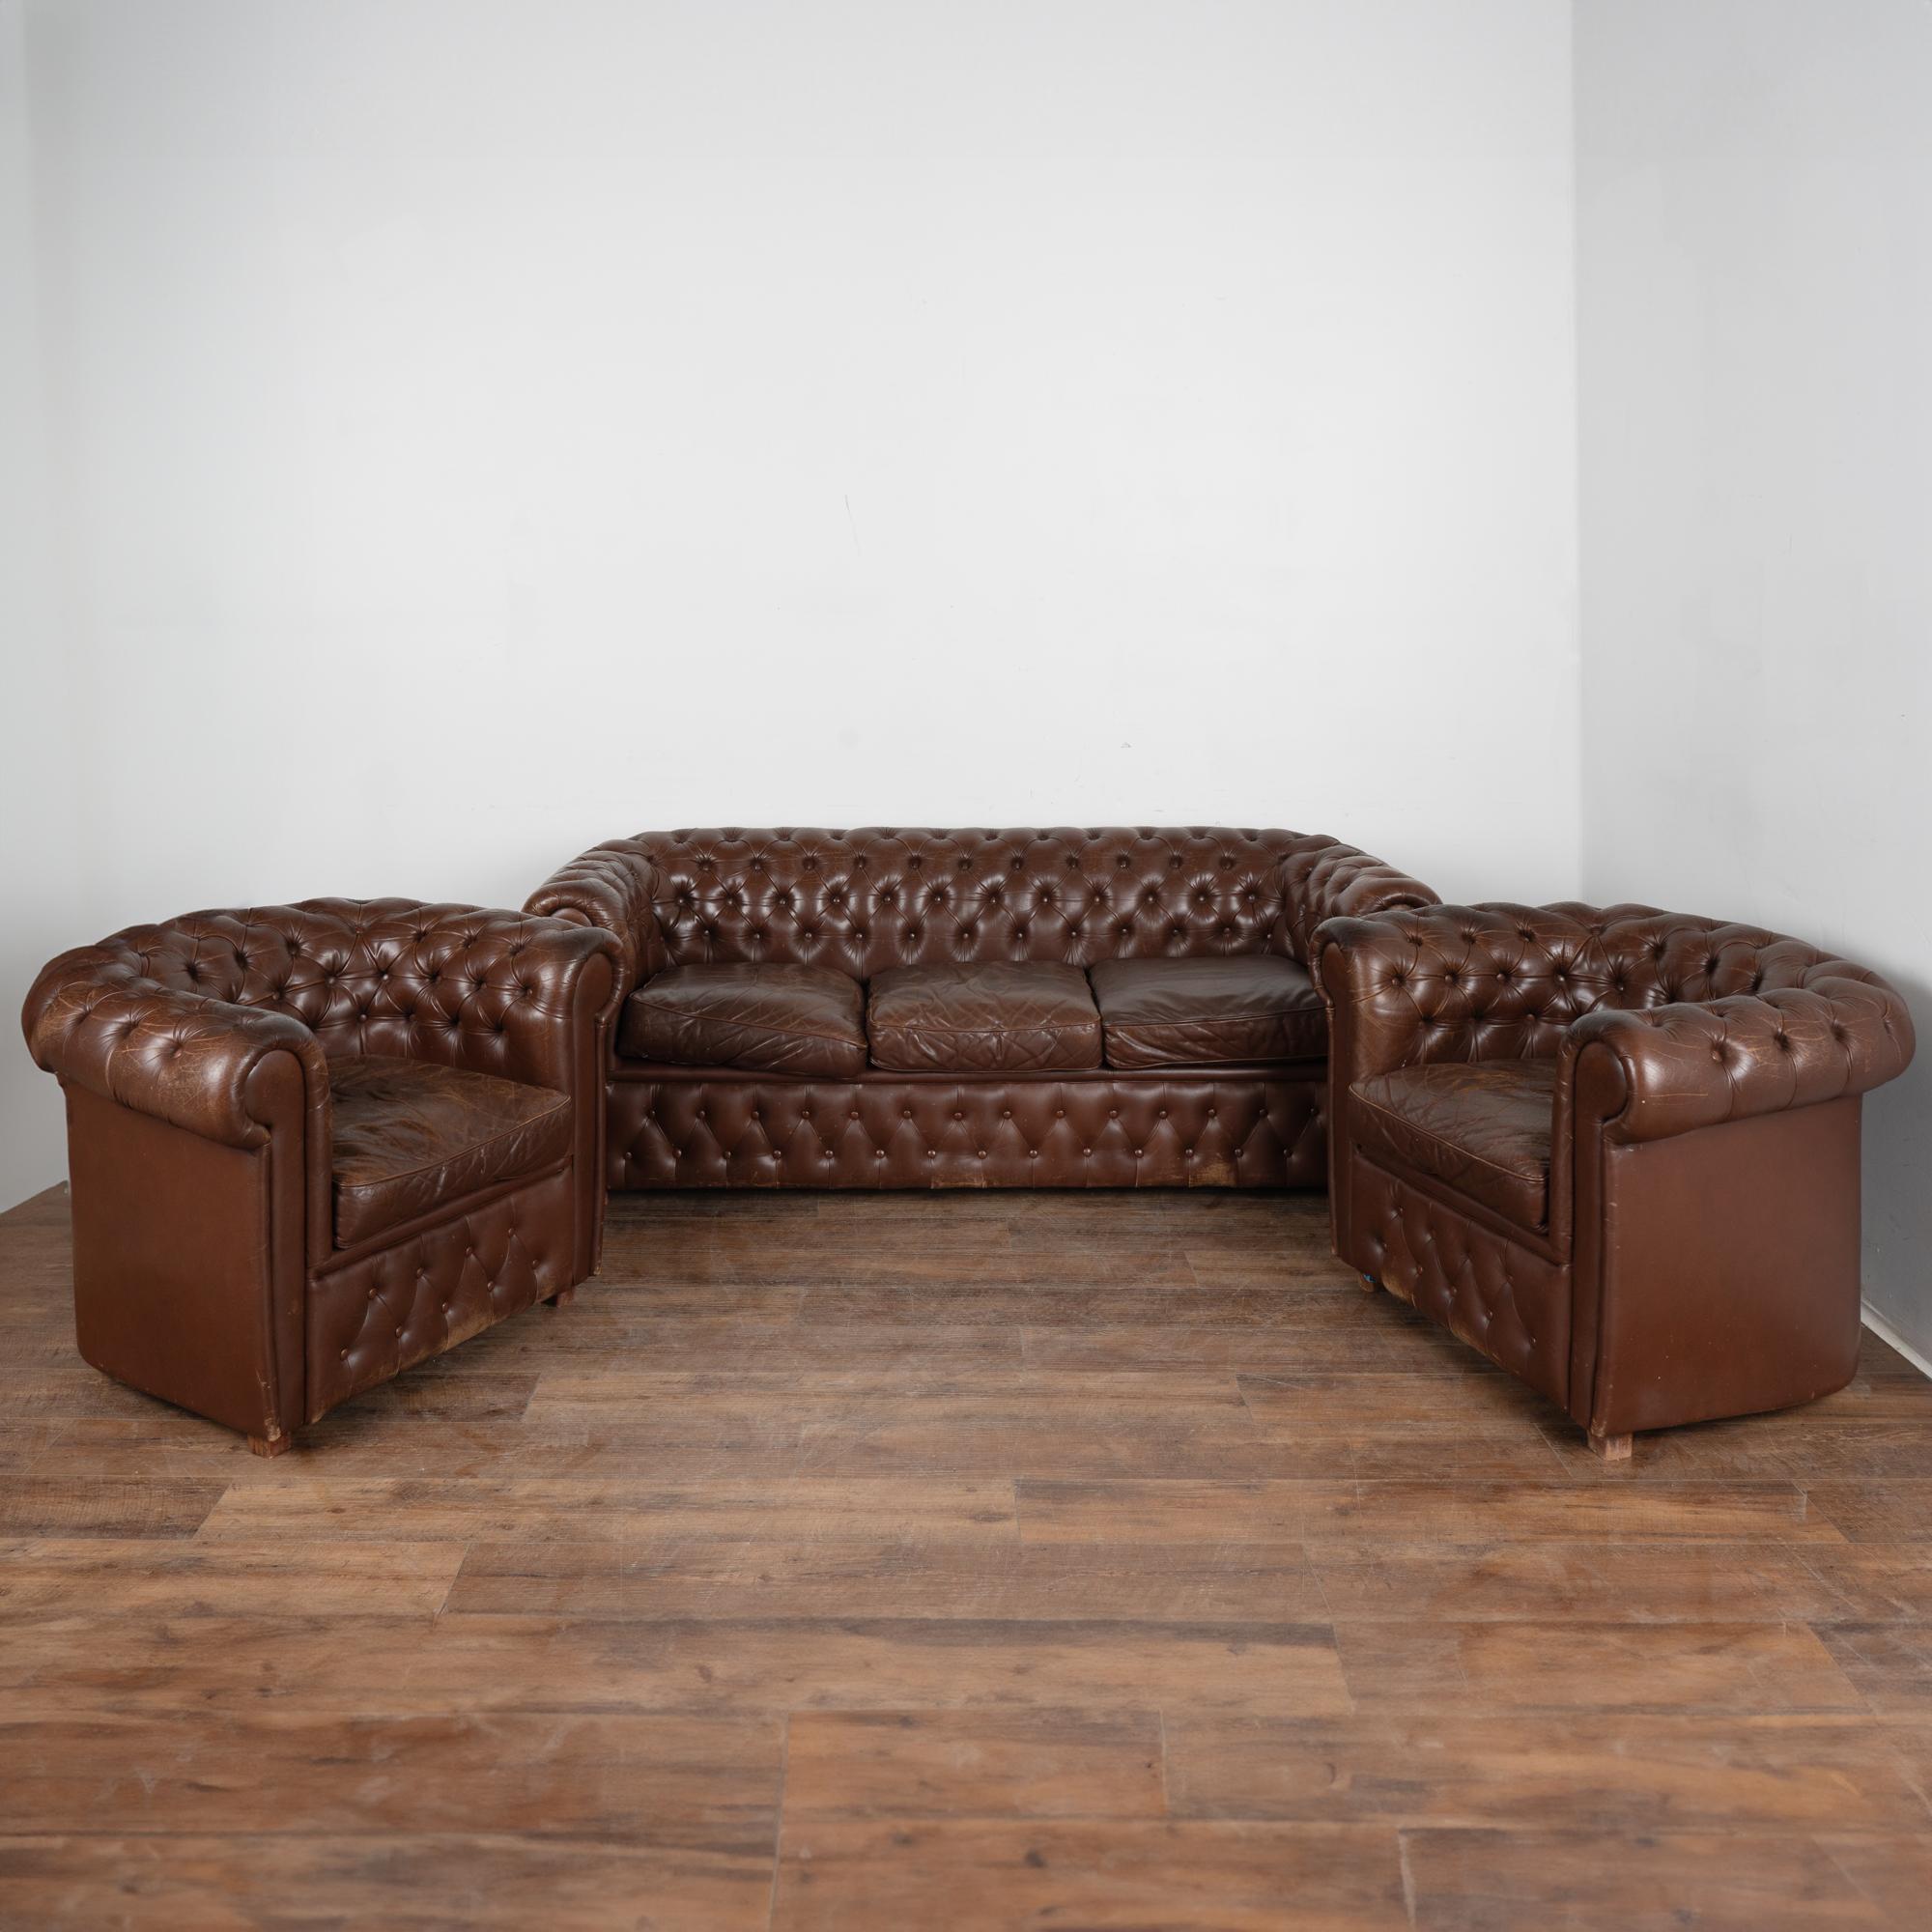 Set (3) vintage leather Chesterfield style sofa and pair of club arm chairs.
The brown leather has traditional tufted buttoned accents and rolled arms, hard wood block feet.
Sold in used vintage condition.
Mulitiple scuffs, scratches, impressions,